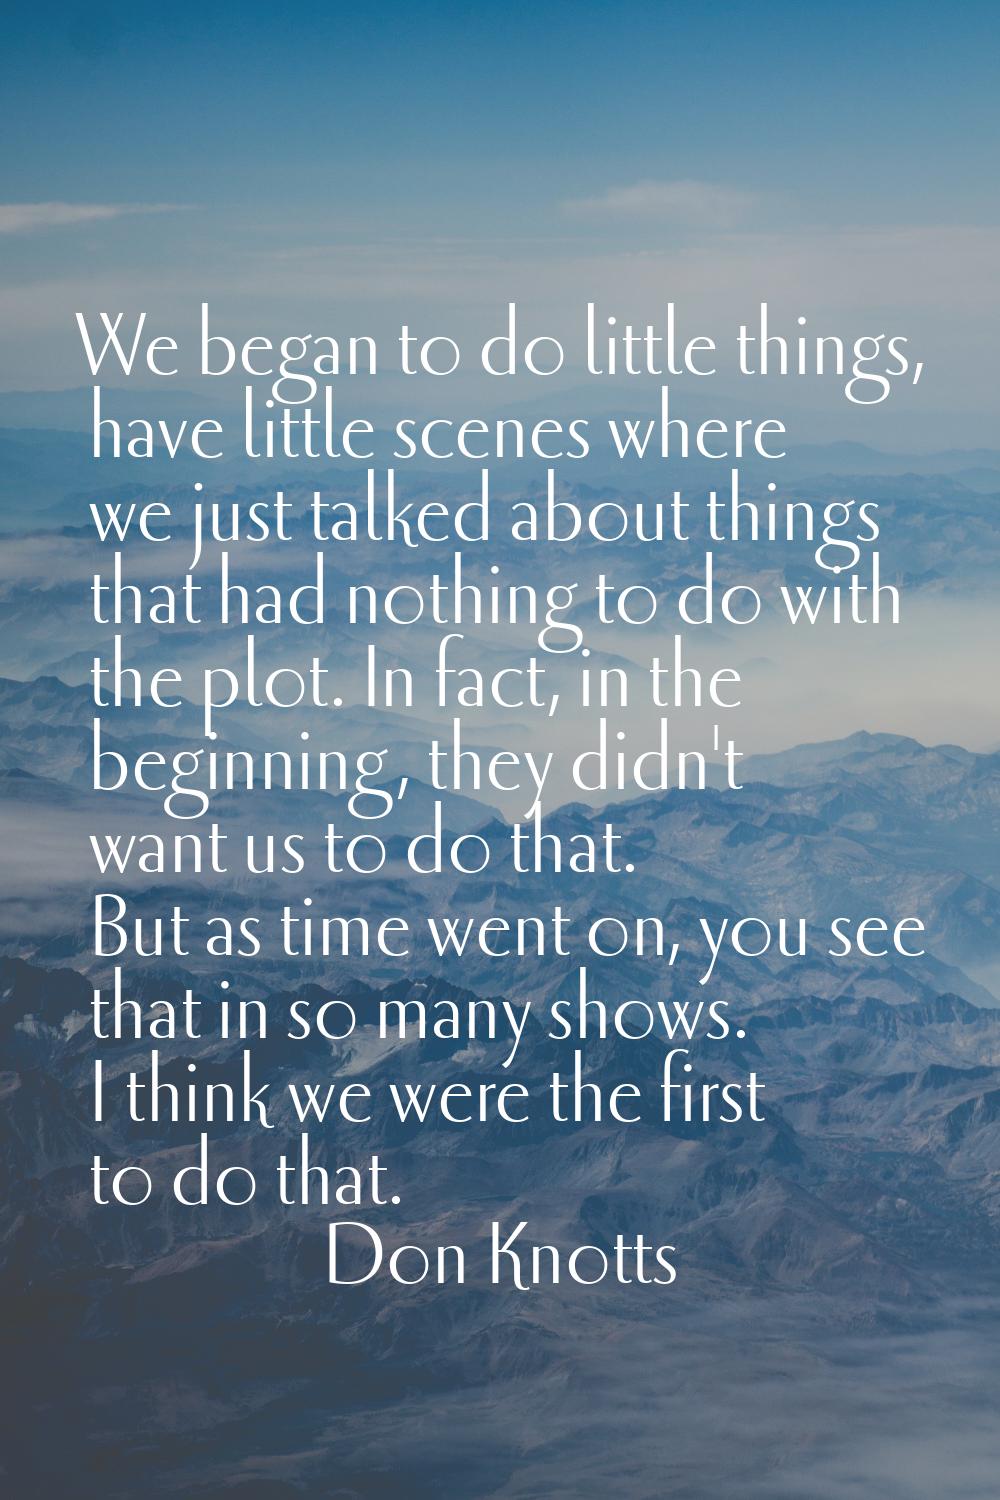 We began to do little things, have little scenes where we just talked about things that had nothing